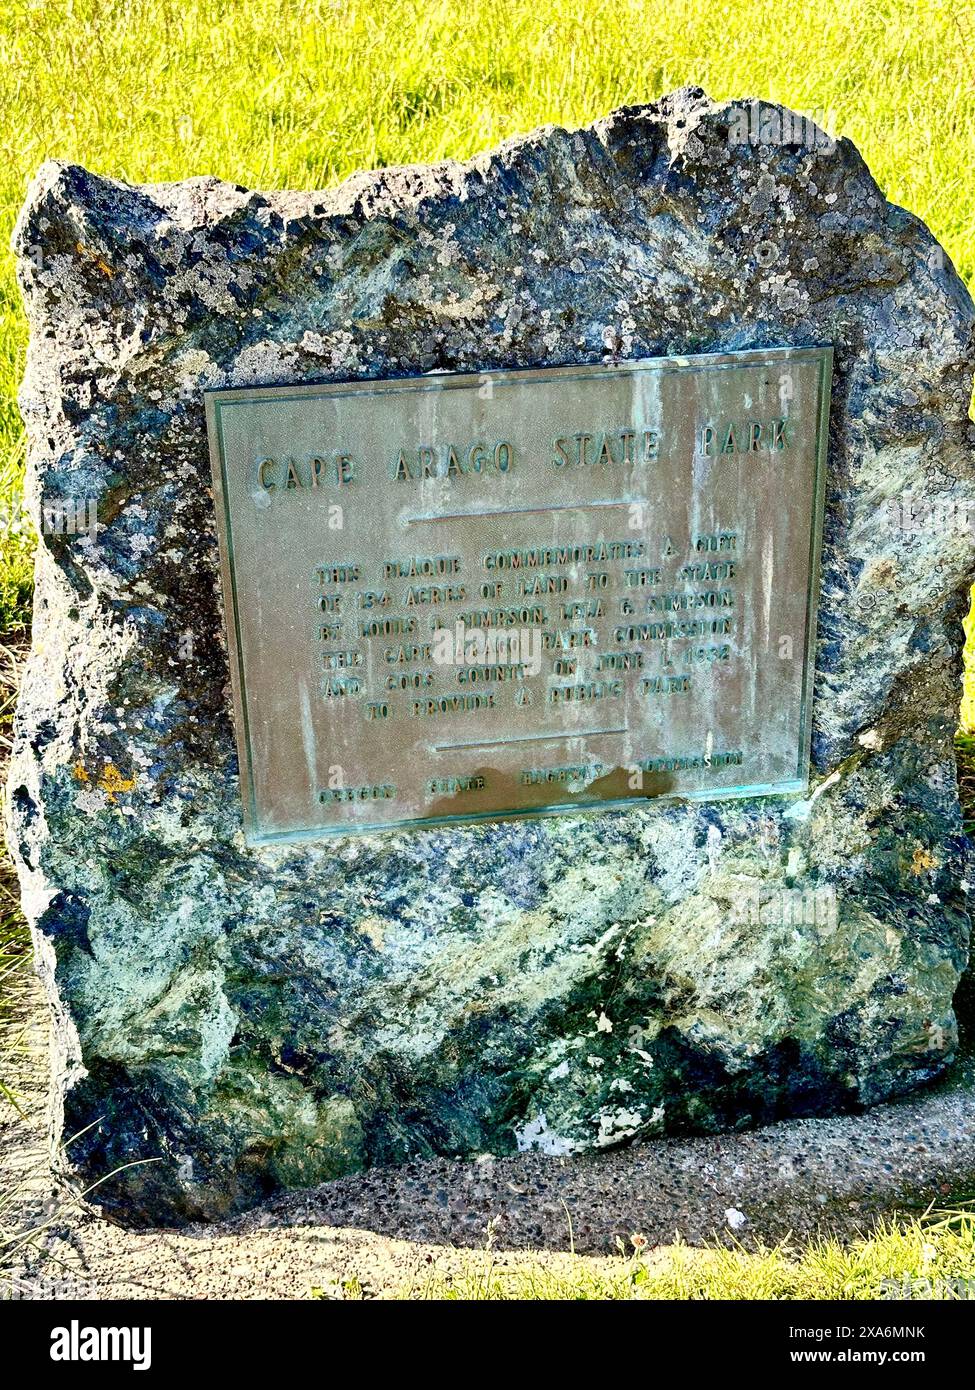 The Cape Arago State Park sign on the rock near Charleston, OR Stock Photo